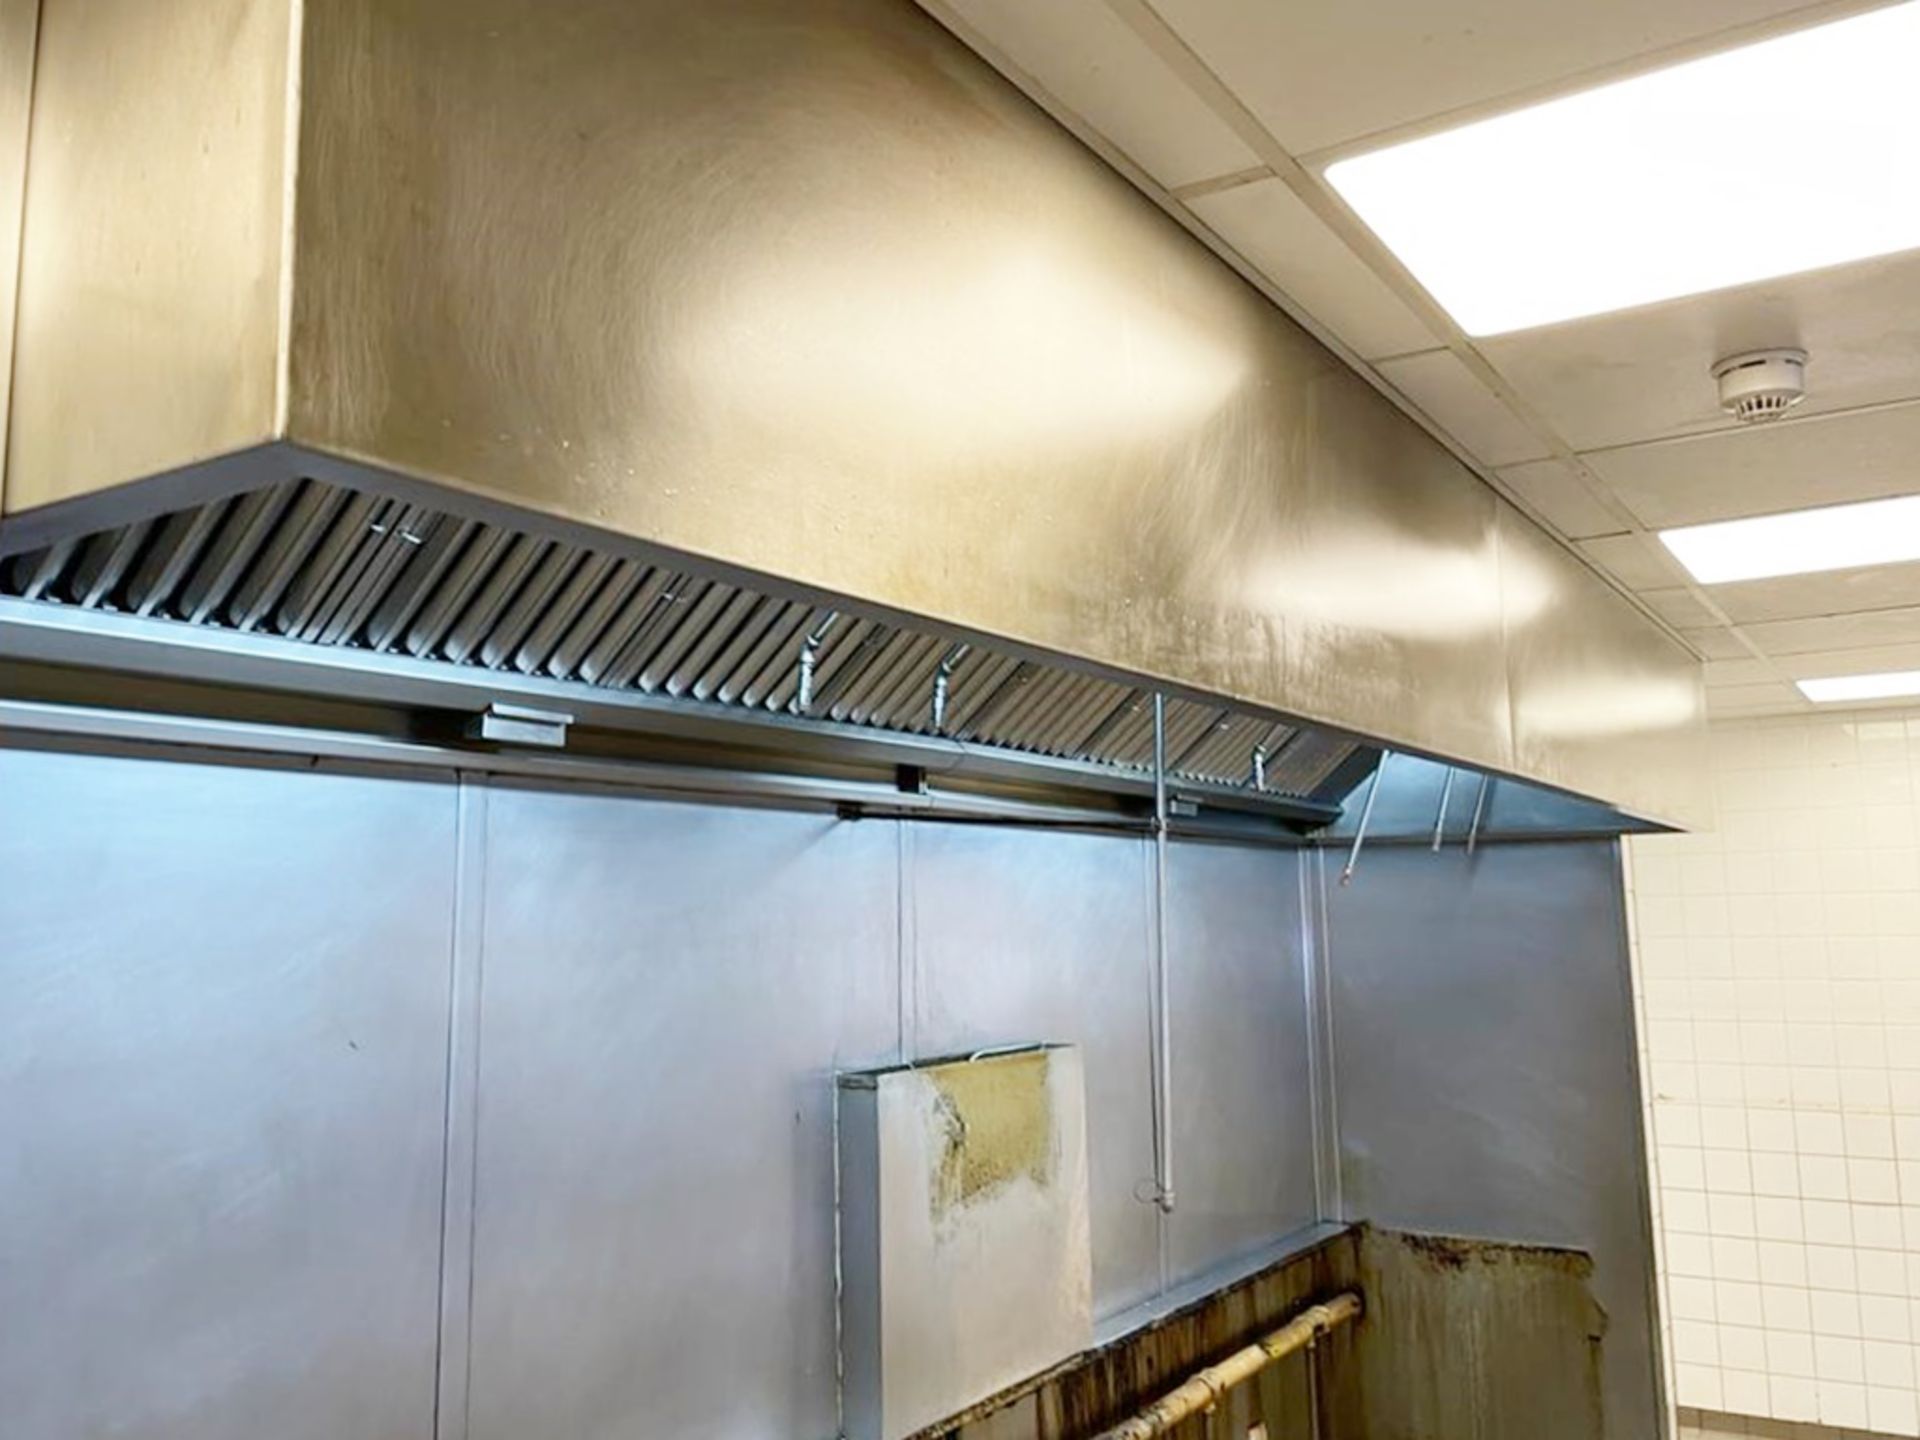 1 x Large Commercial Kitchen Extractor Canopy With Filters and Fire Suppression Fixtures - Stainless - Image 7 of 7